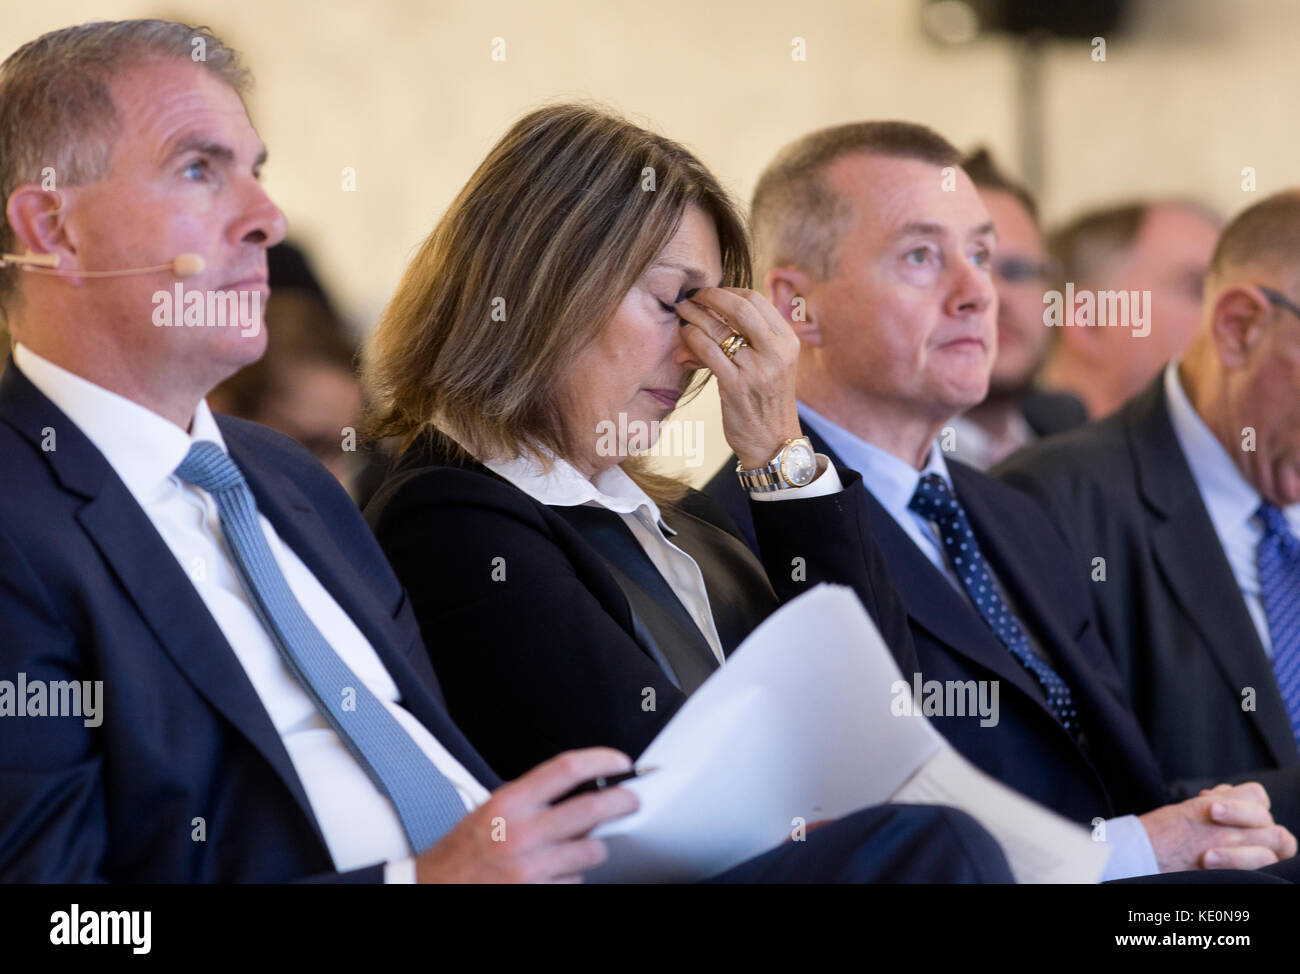 October 17, 2017 - Brussels, Belgium: CEO Lufthansa & Chair A4E Carsten Spohr (L), Chief Executive designate of ITV. Dame Carolyn Julia McCall DBE (C) and the CEO of International Airlines Group Willie Walsh (R) are listening during a forum: 'Efficient air transport for Europeans' in the Square, Brussels Meeting Centre. - NO WIRE SERVICE - Photo: Thierry Monasse/dpa - NO WIRE SERVICE - Photo: Thierry Monasse/dpa Stock Photo